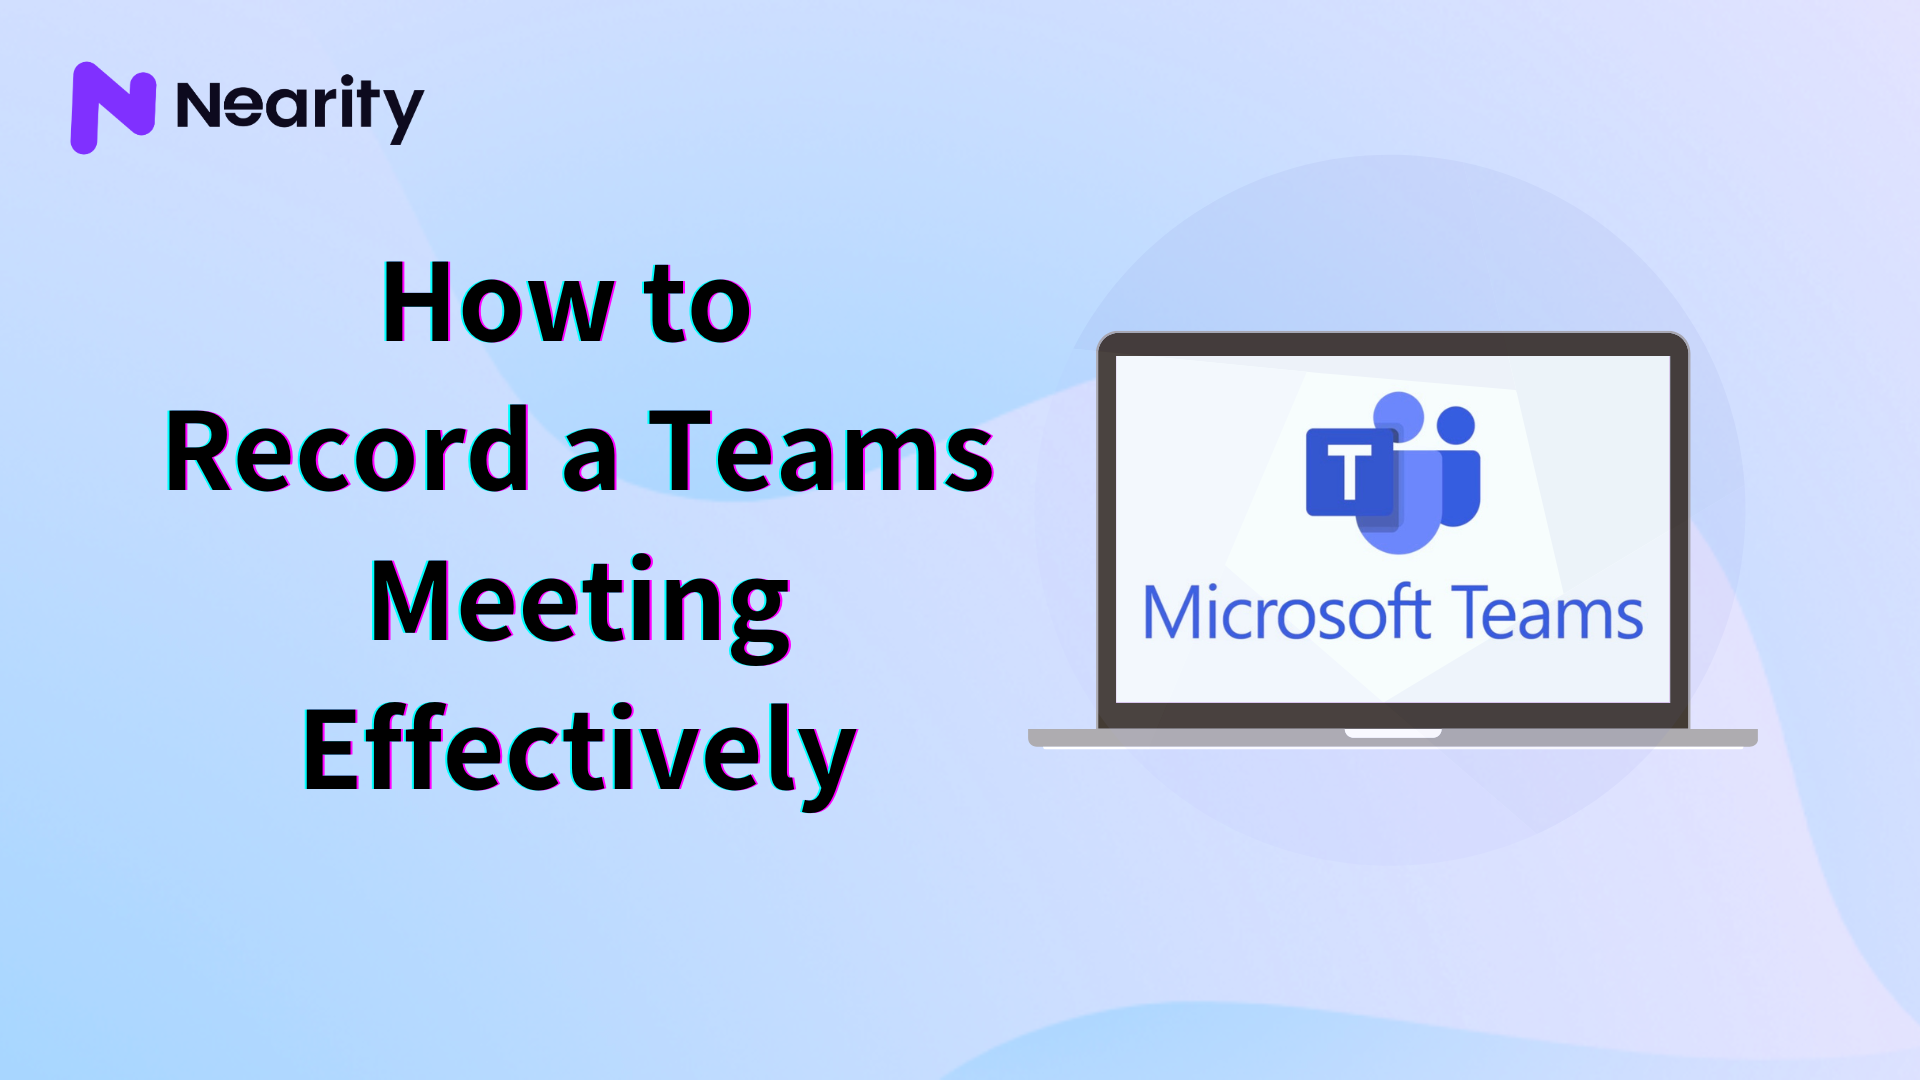 How to Record a Teams Meeting Effectively